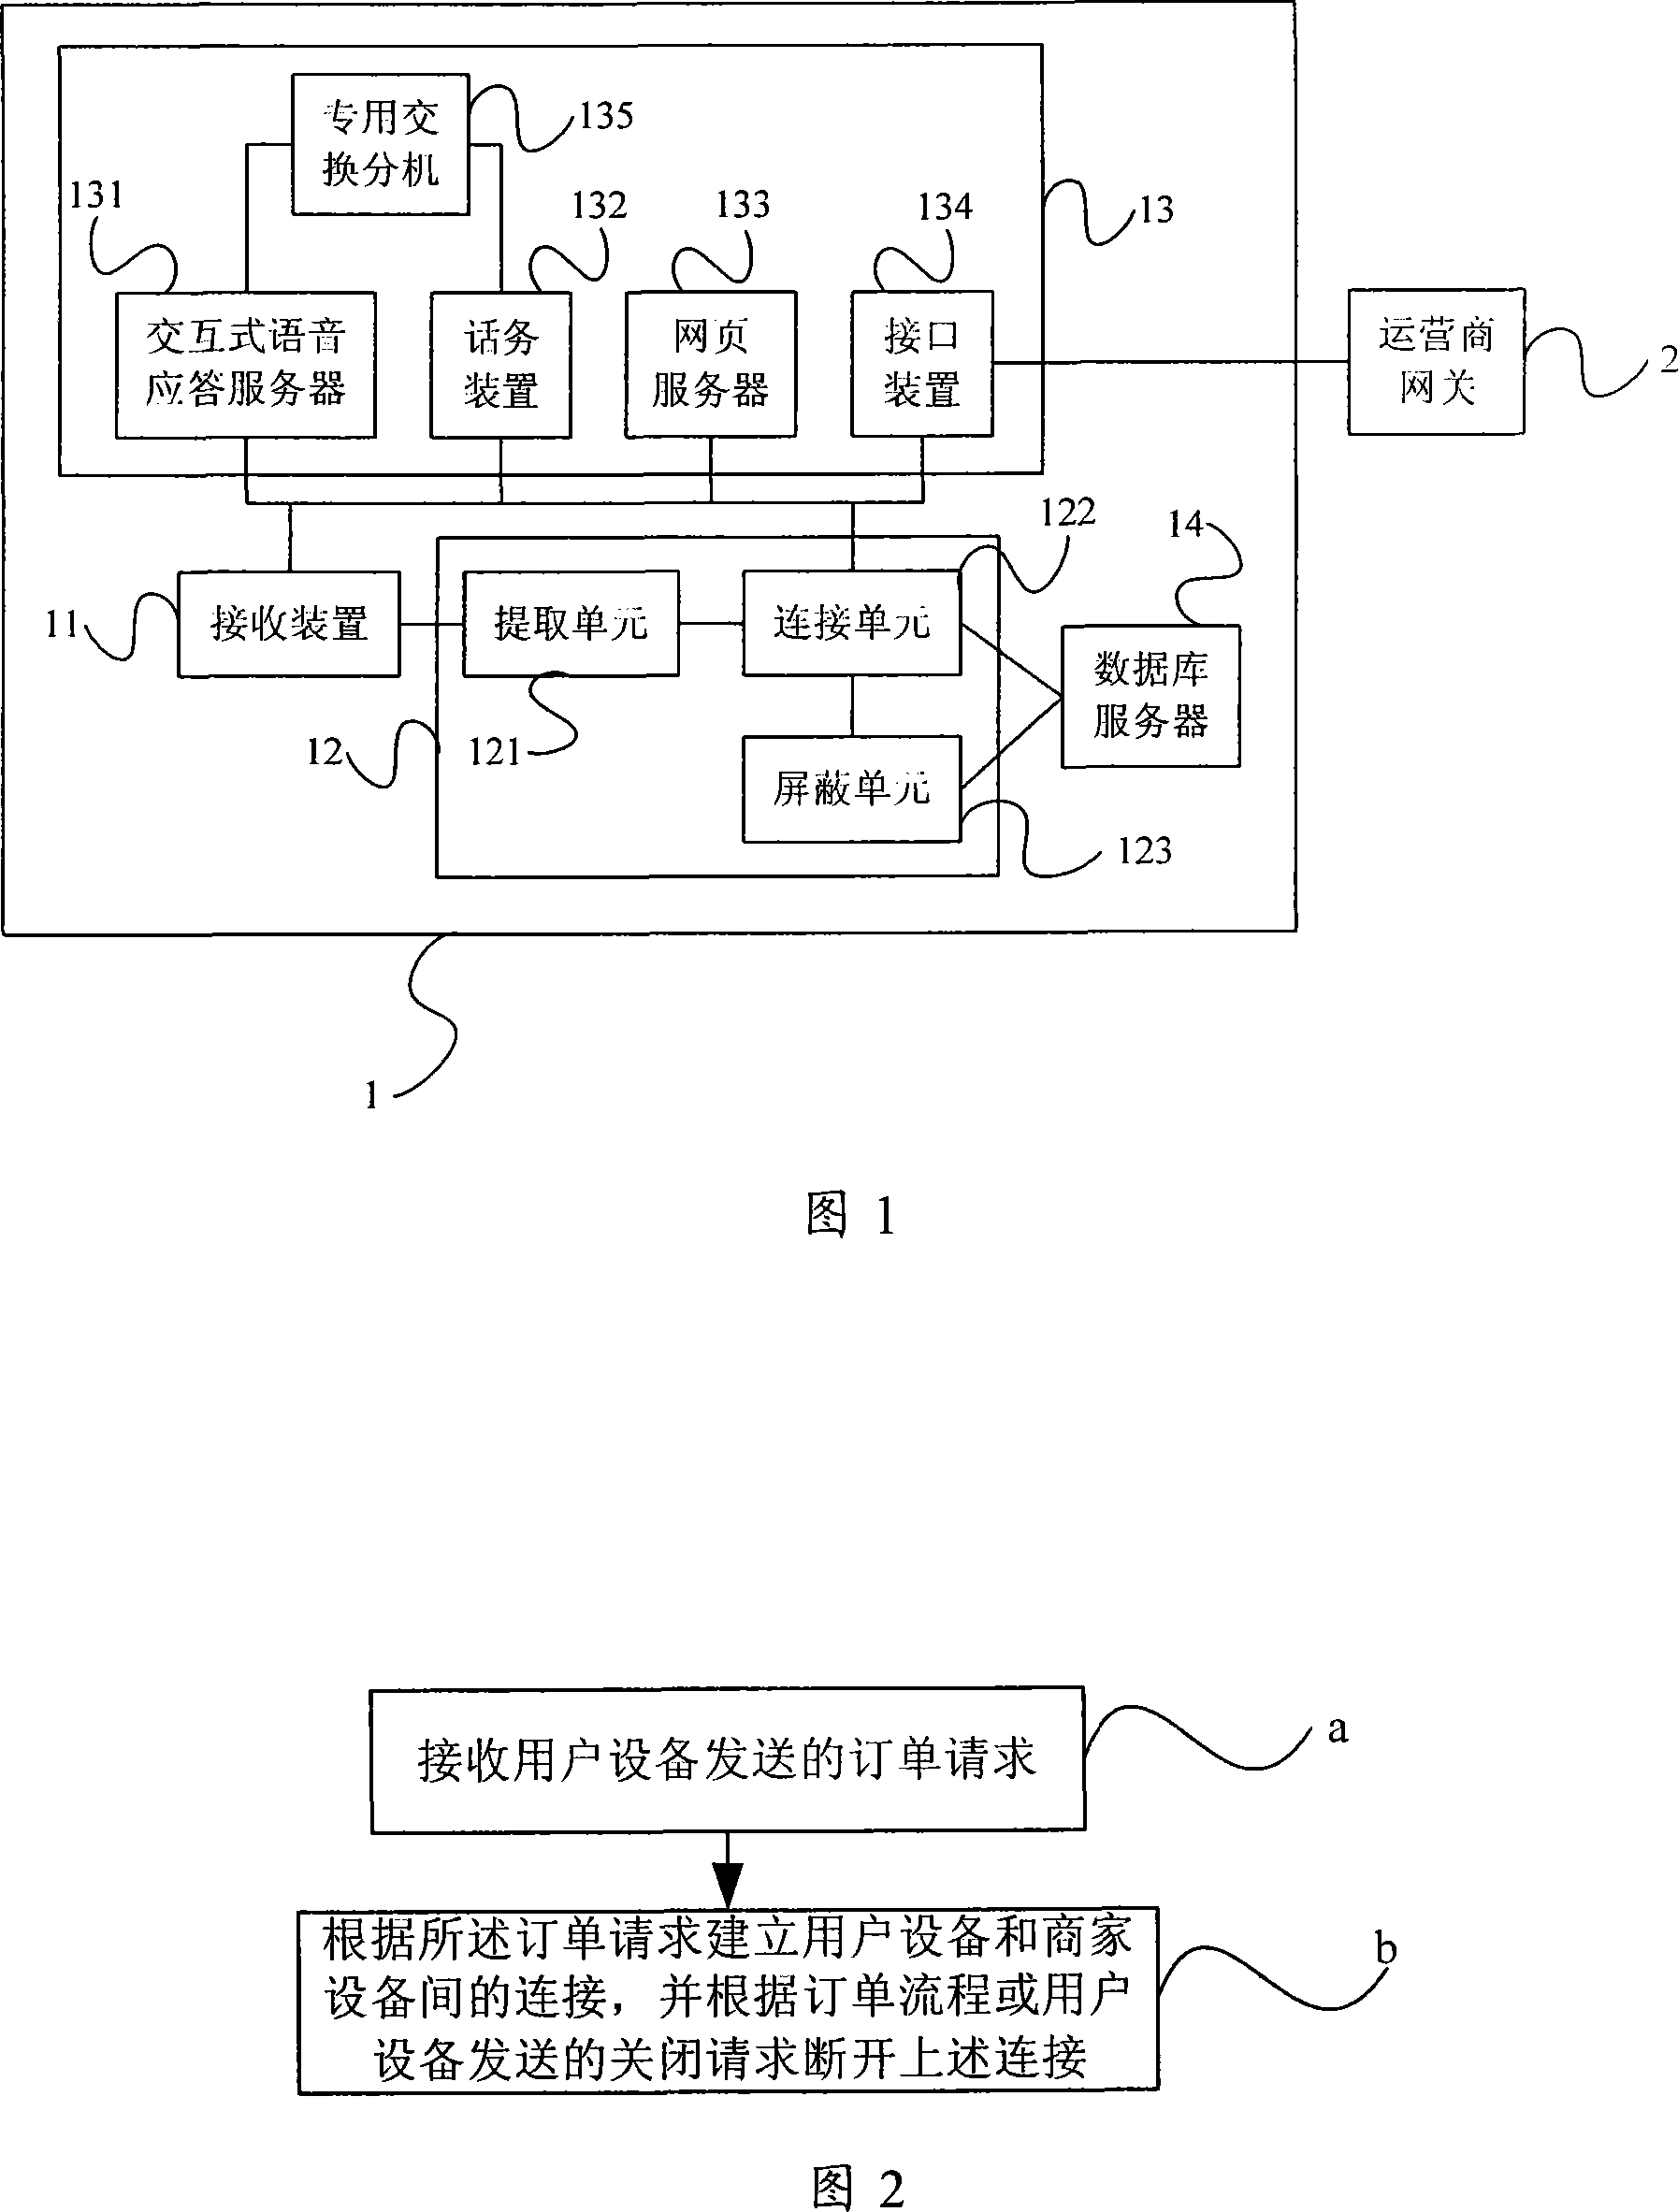 System, method and device for implementing order interactive